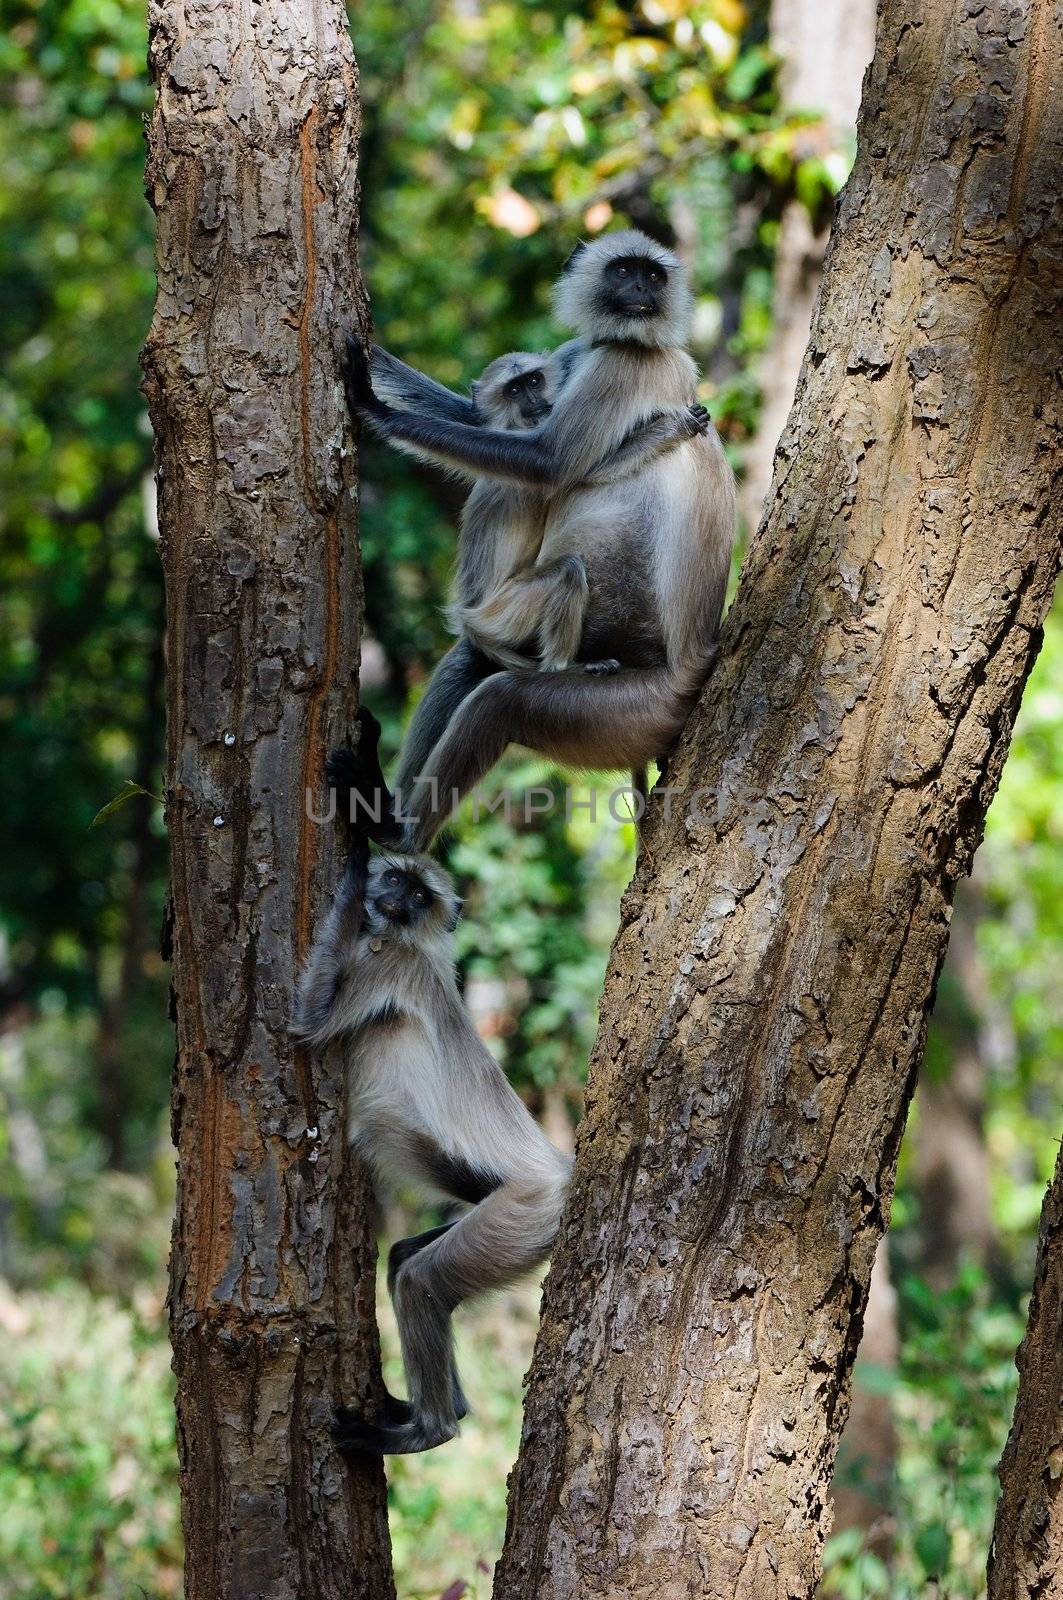 Monkeys have funny settled down in a tree fork.